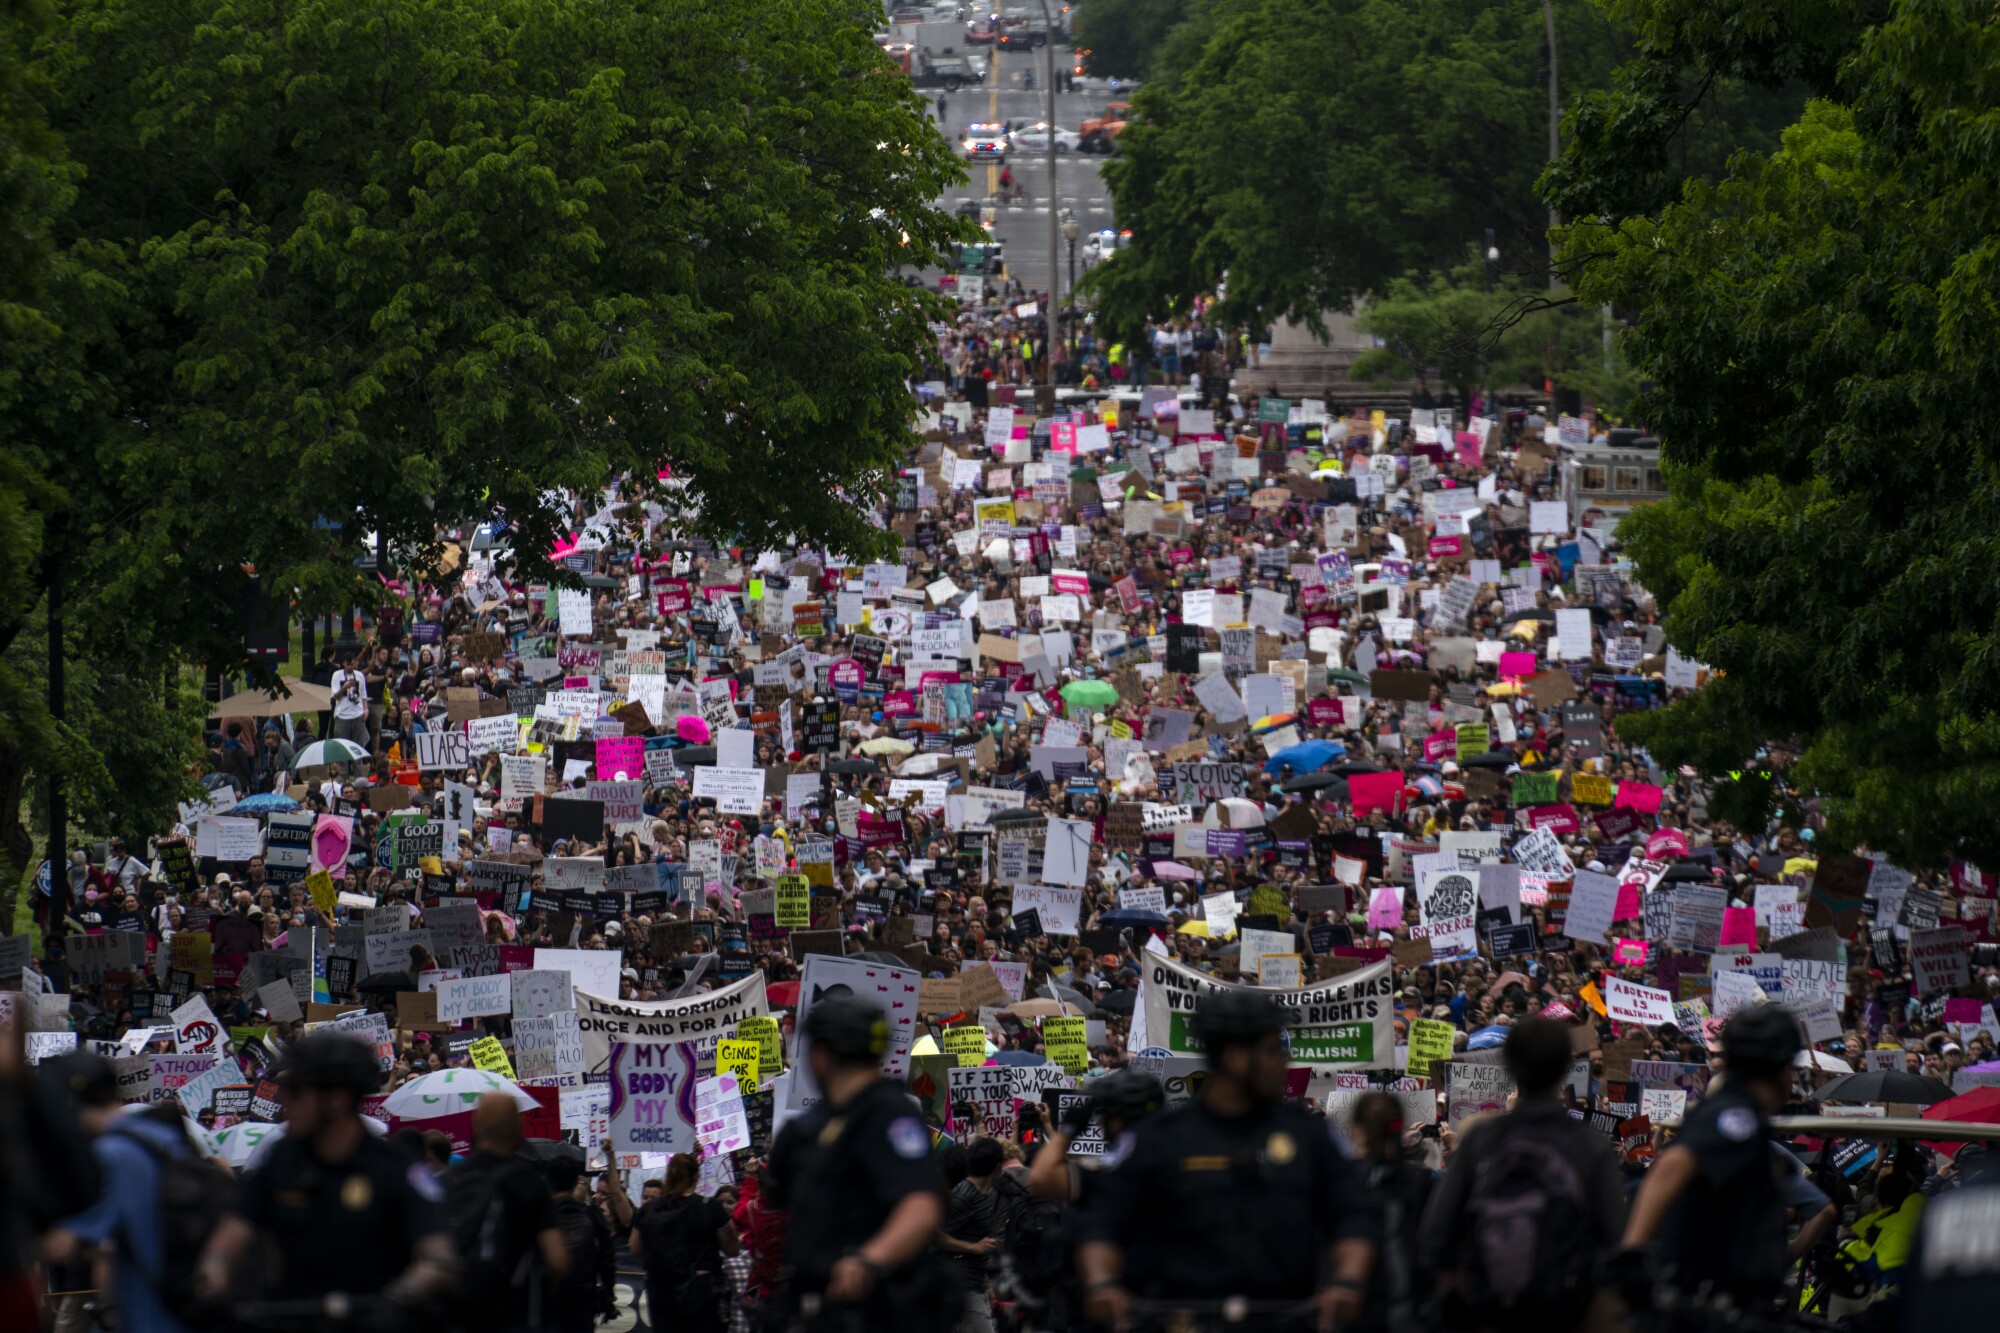 Abortion rights activists march up Constitution Avenue in Washington.